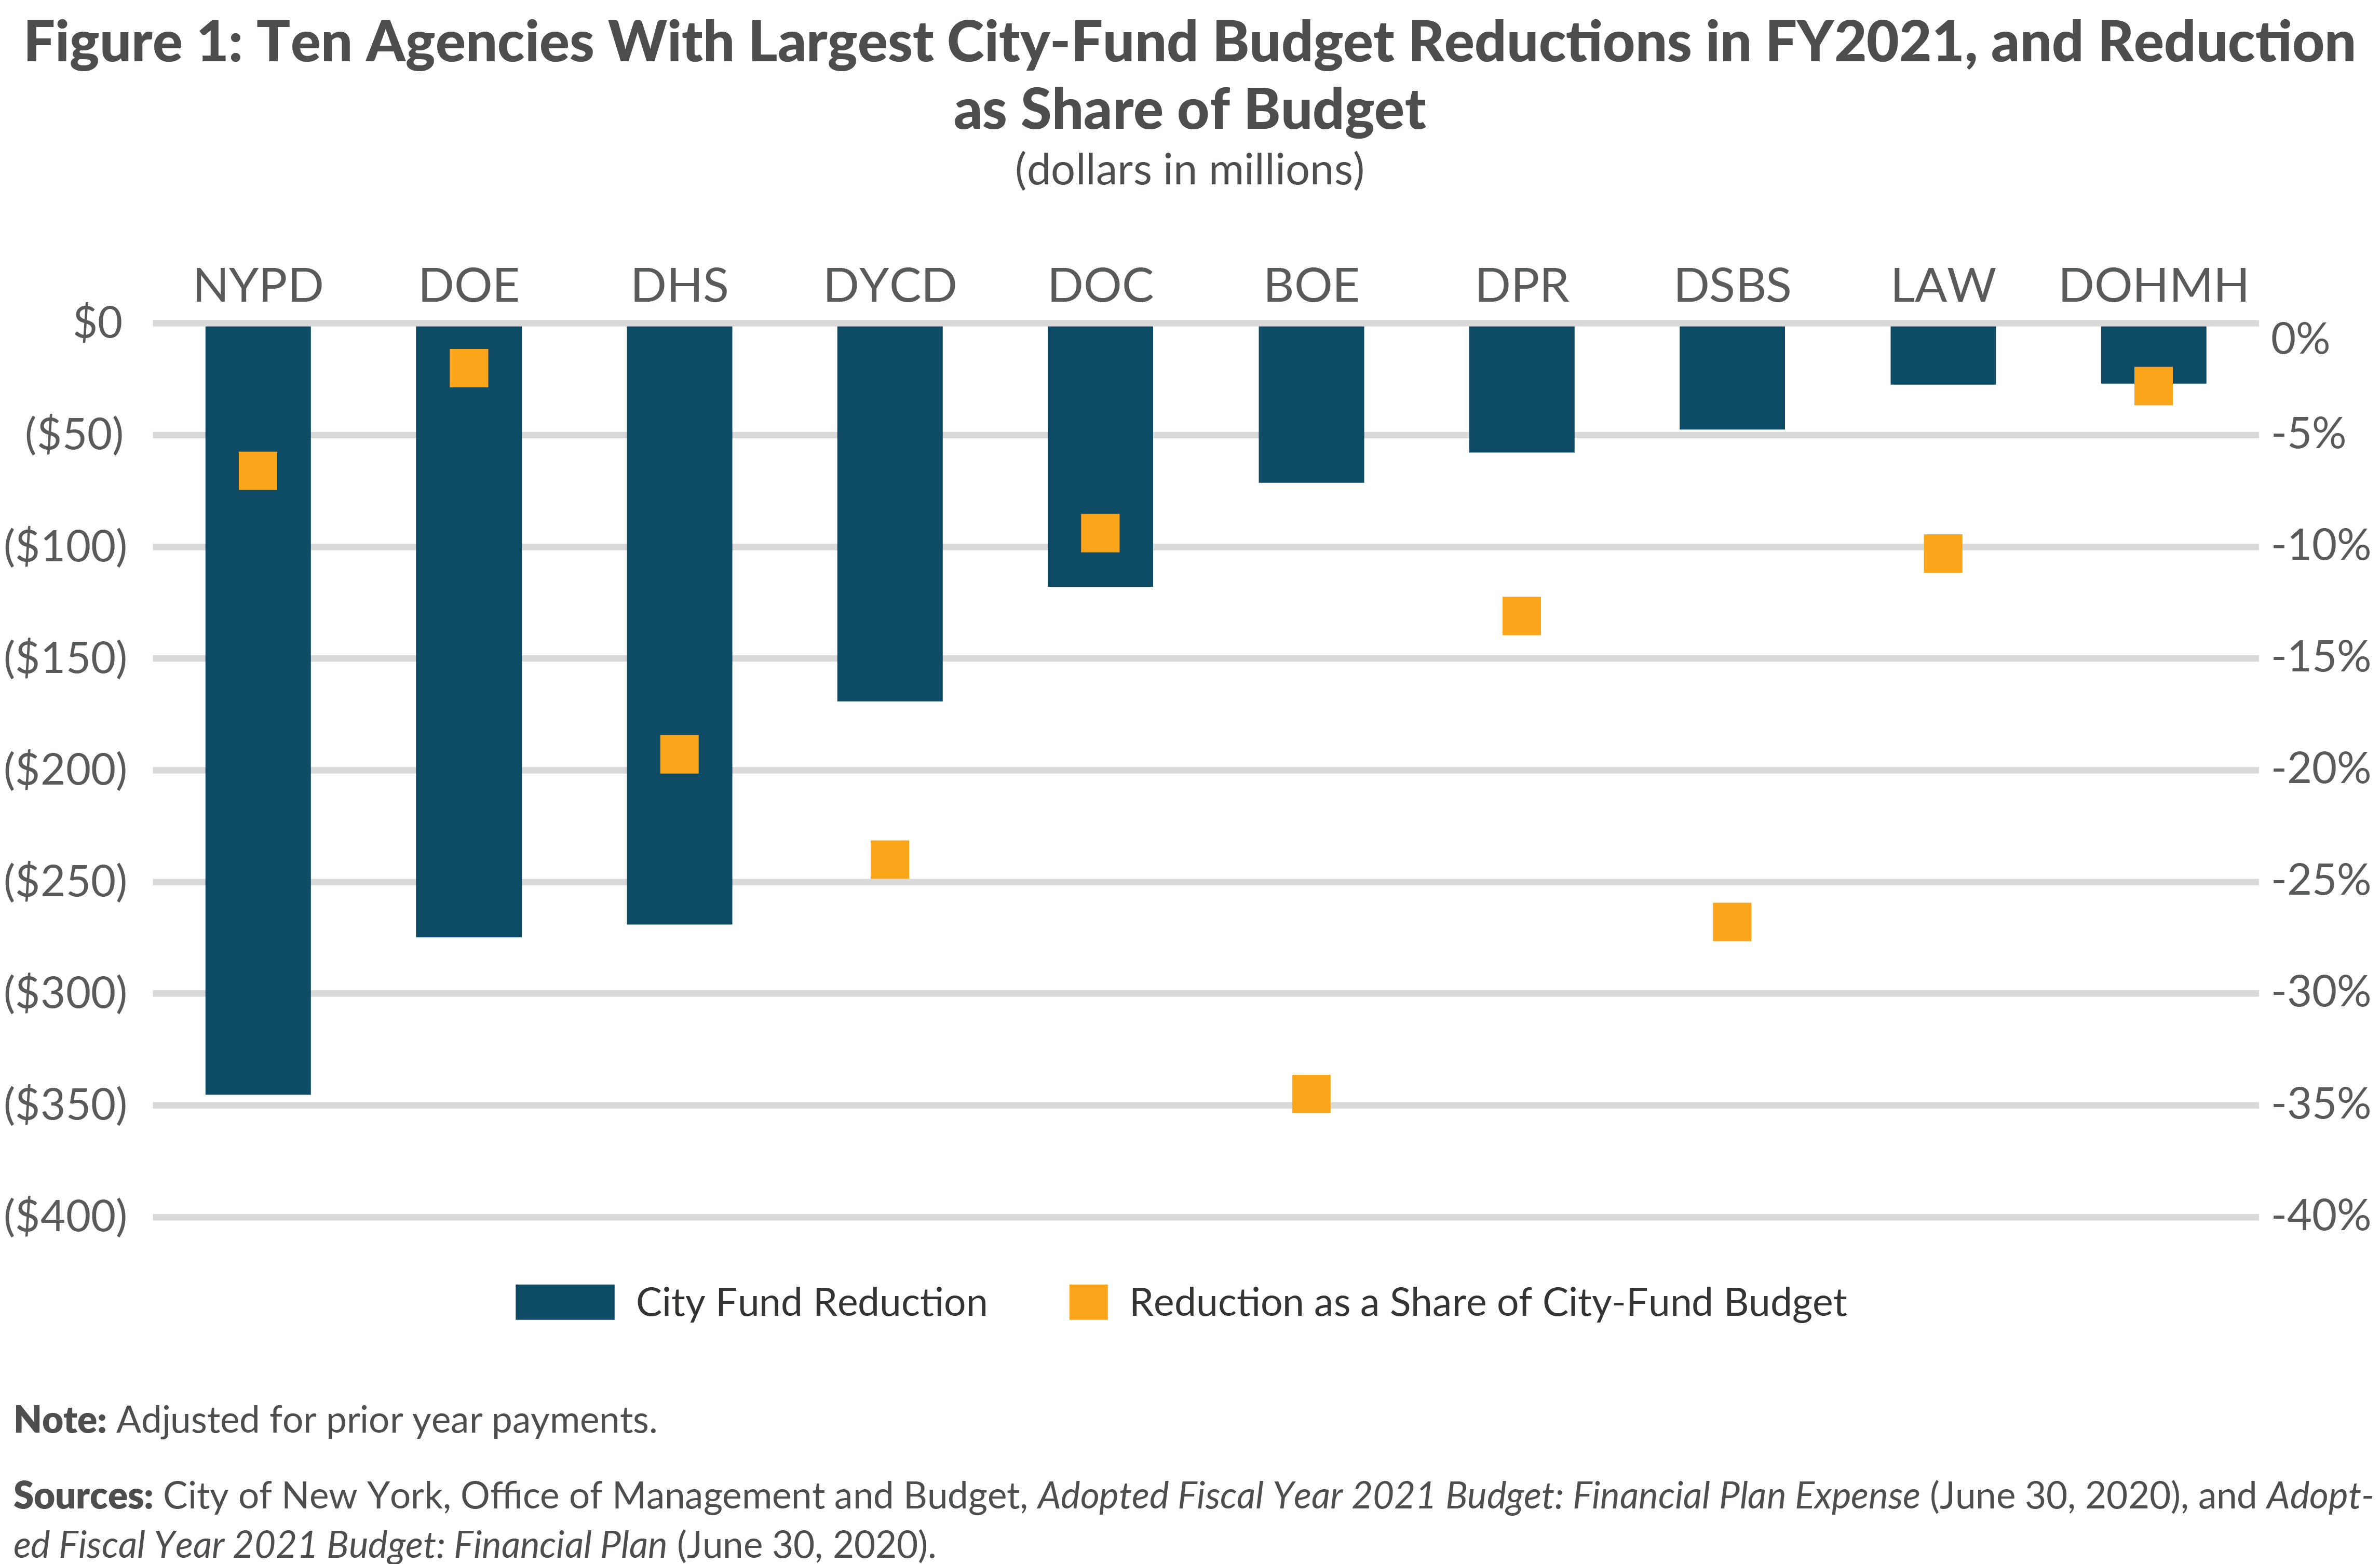 Figure 1. Ten Agencies With Largest City-Fund Budget Reductions in FY2021, and Reduction as Share of Budget